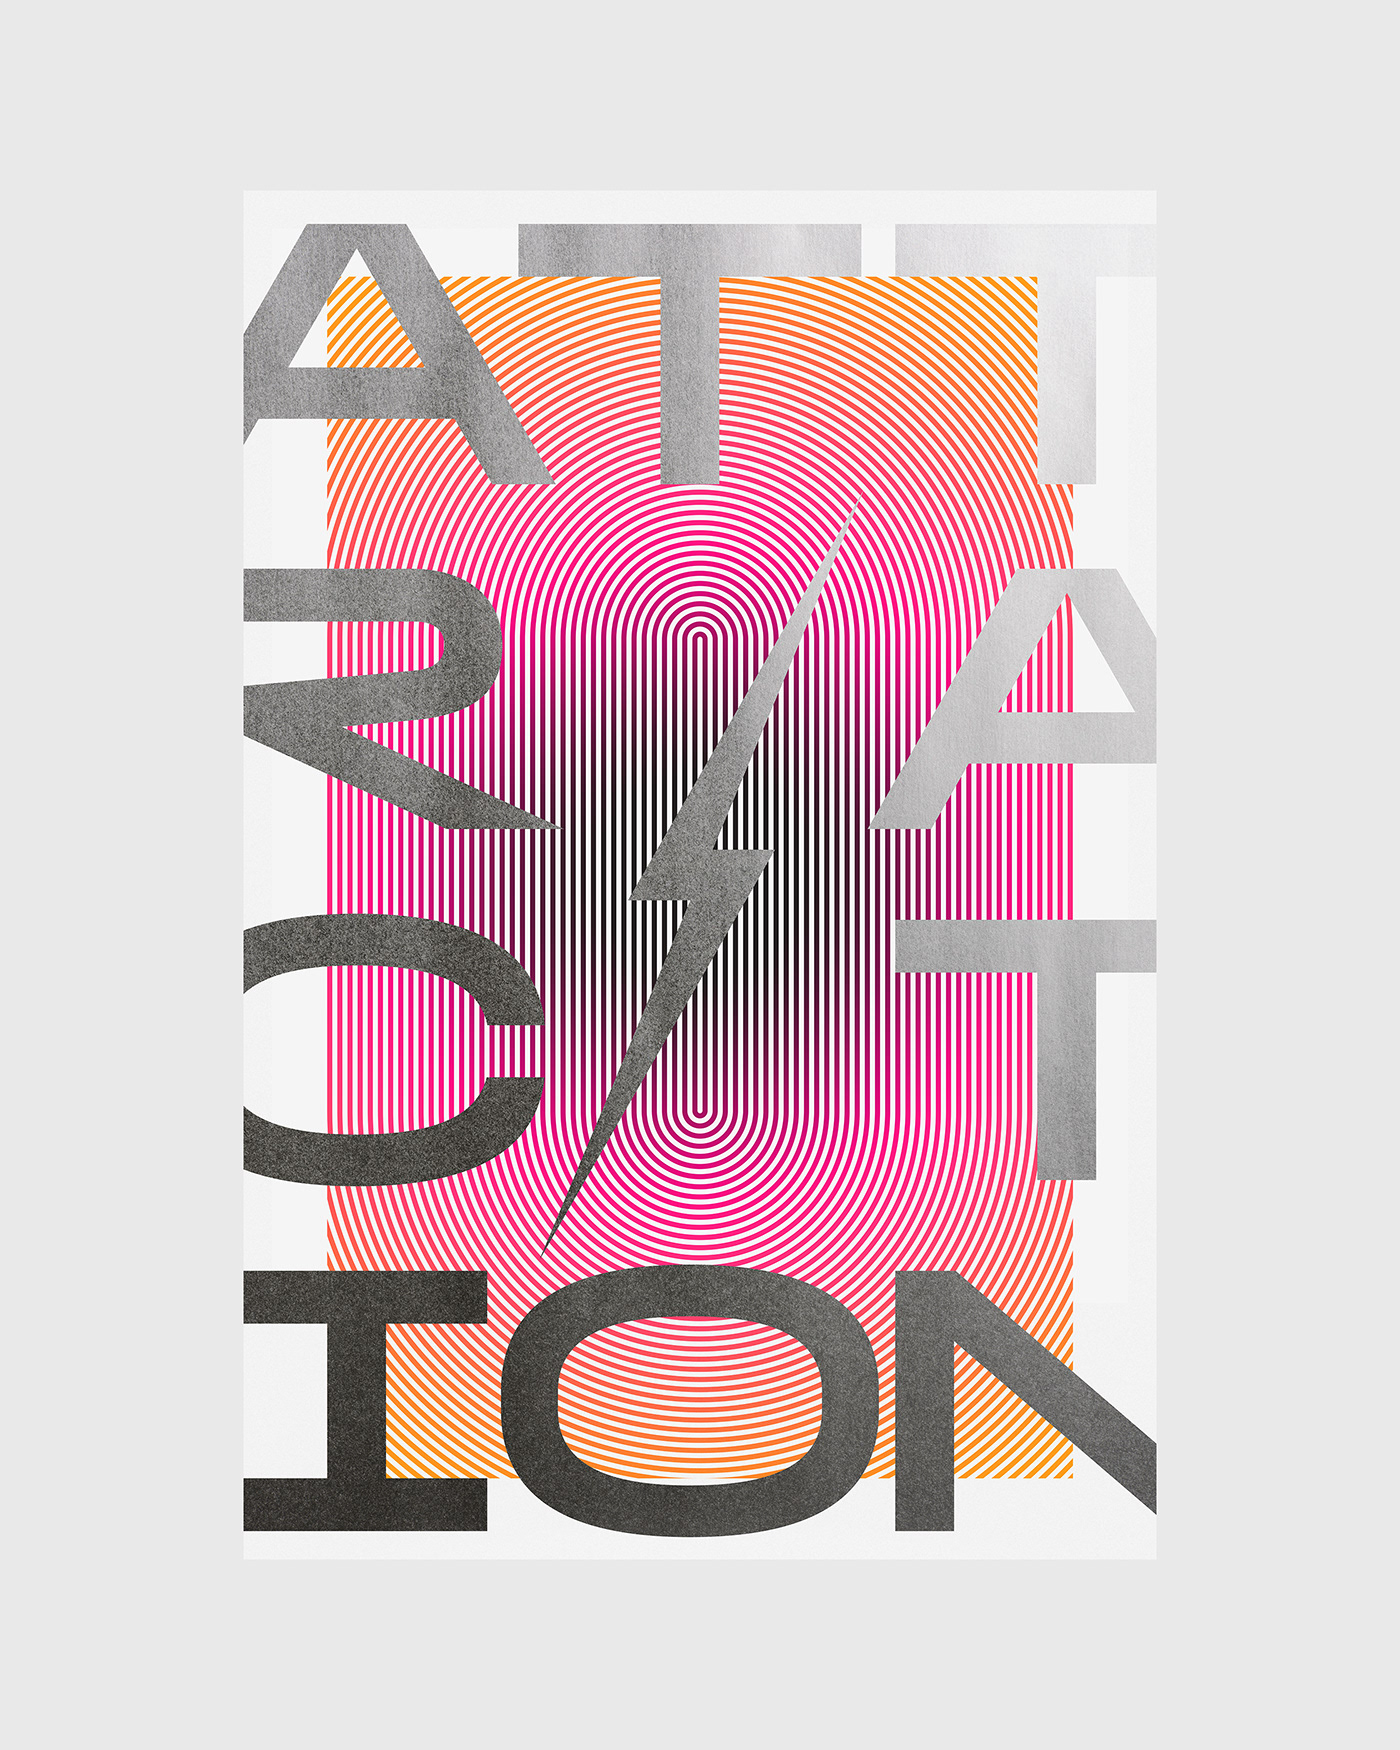 Attraction poster by Xtian Miller